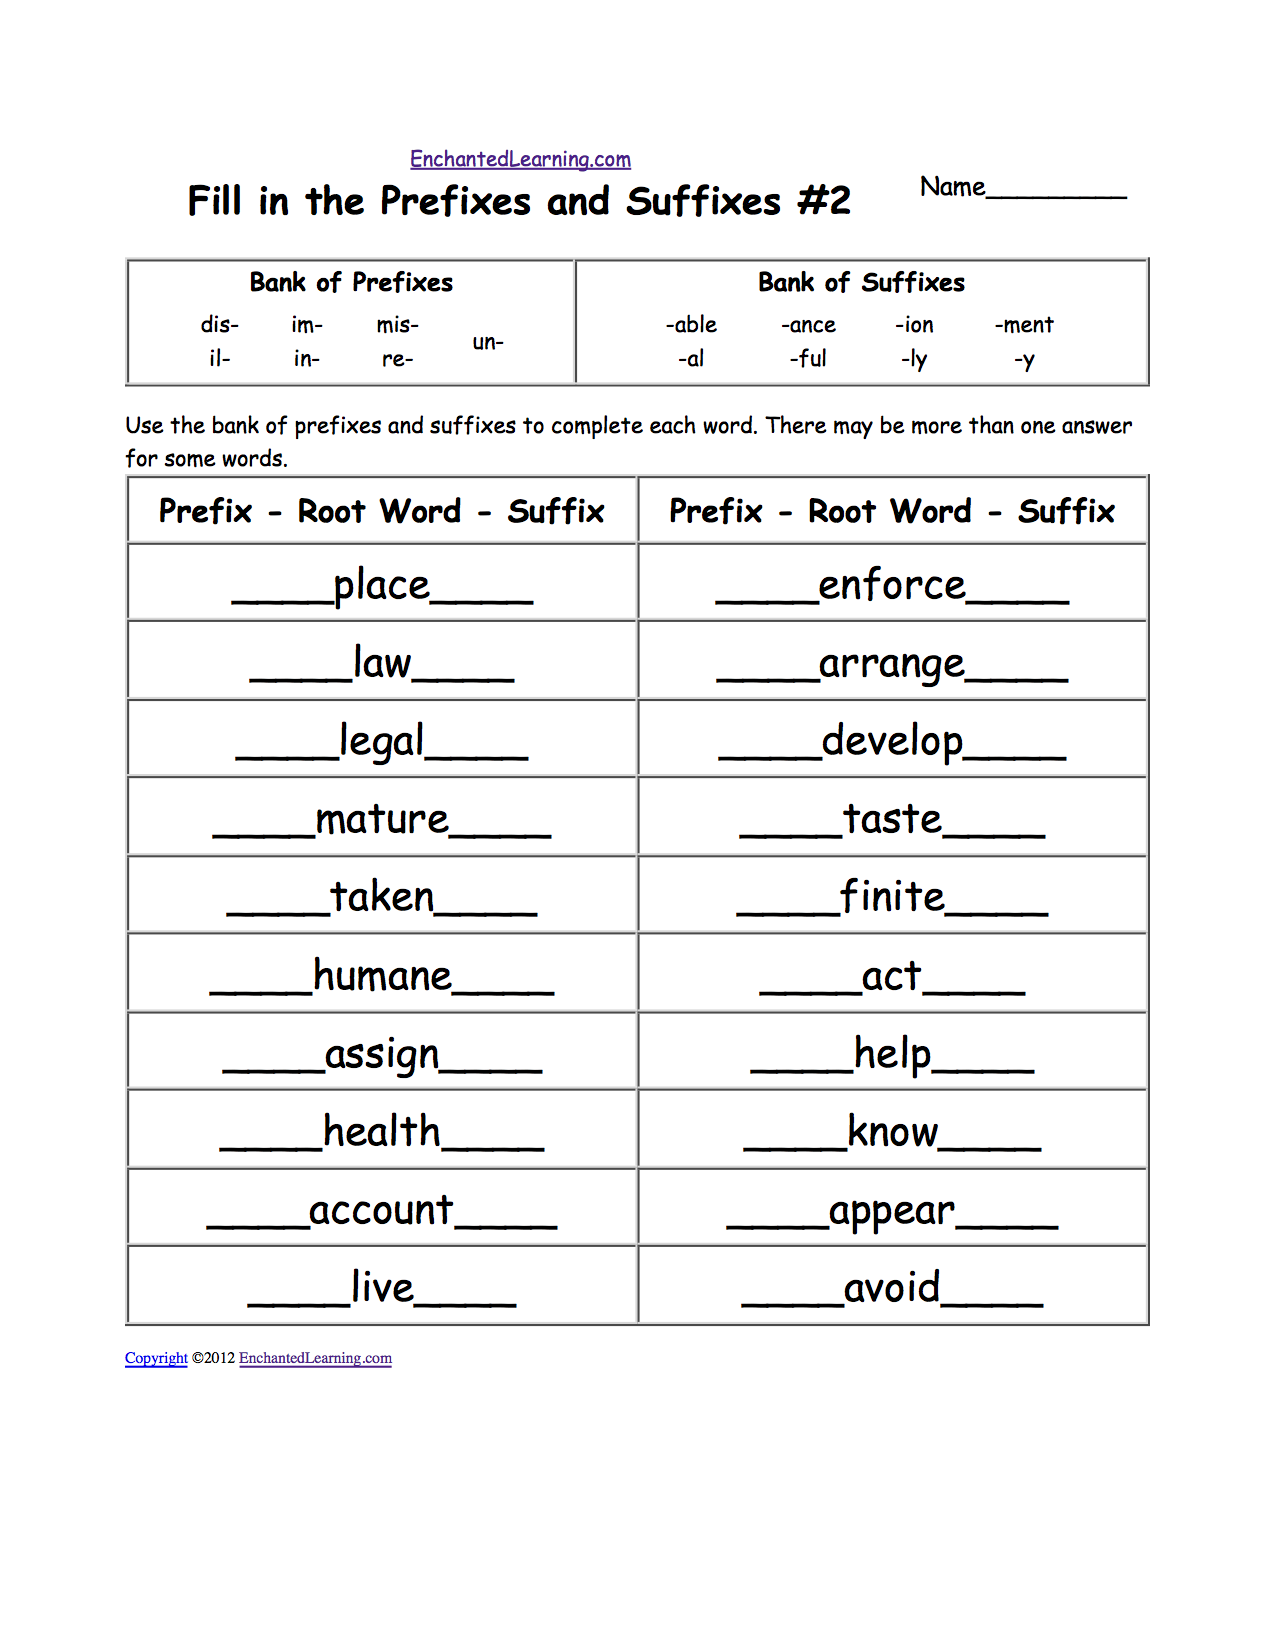 prefixes-and-suffixes-enchanted-learning